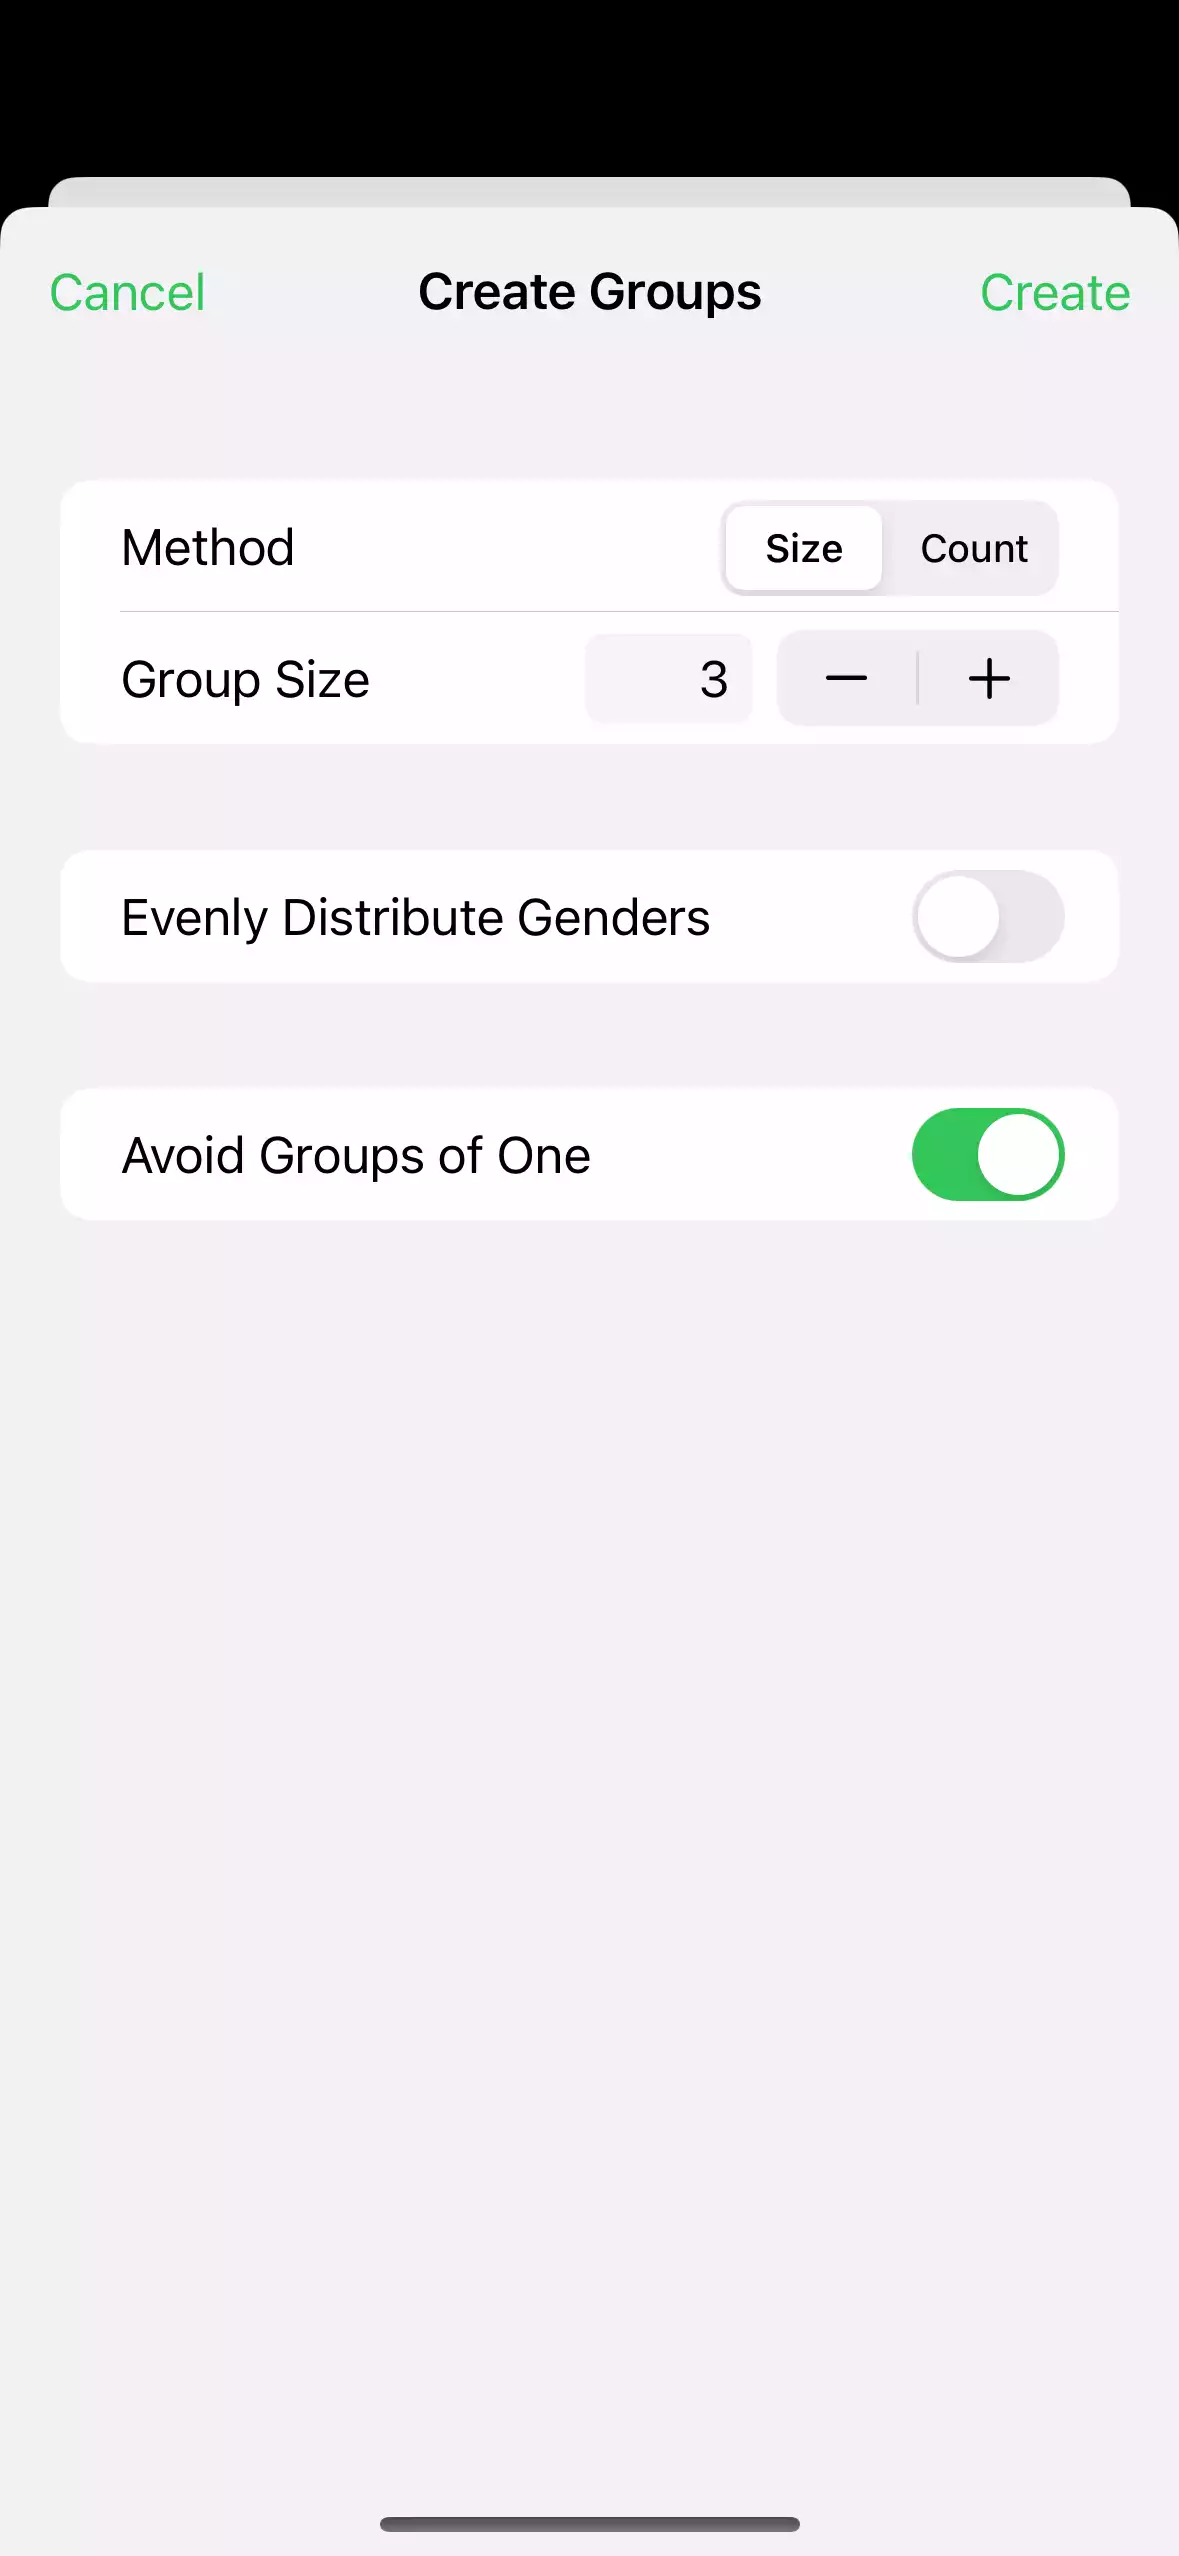 A screenshot of the create groups screen, with options including “Method” (size vs count), “Group Size”, “Evenly Distribute Genders”, and “Avoid Groups of One”.